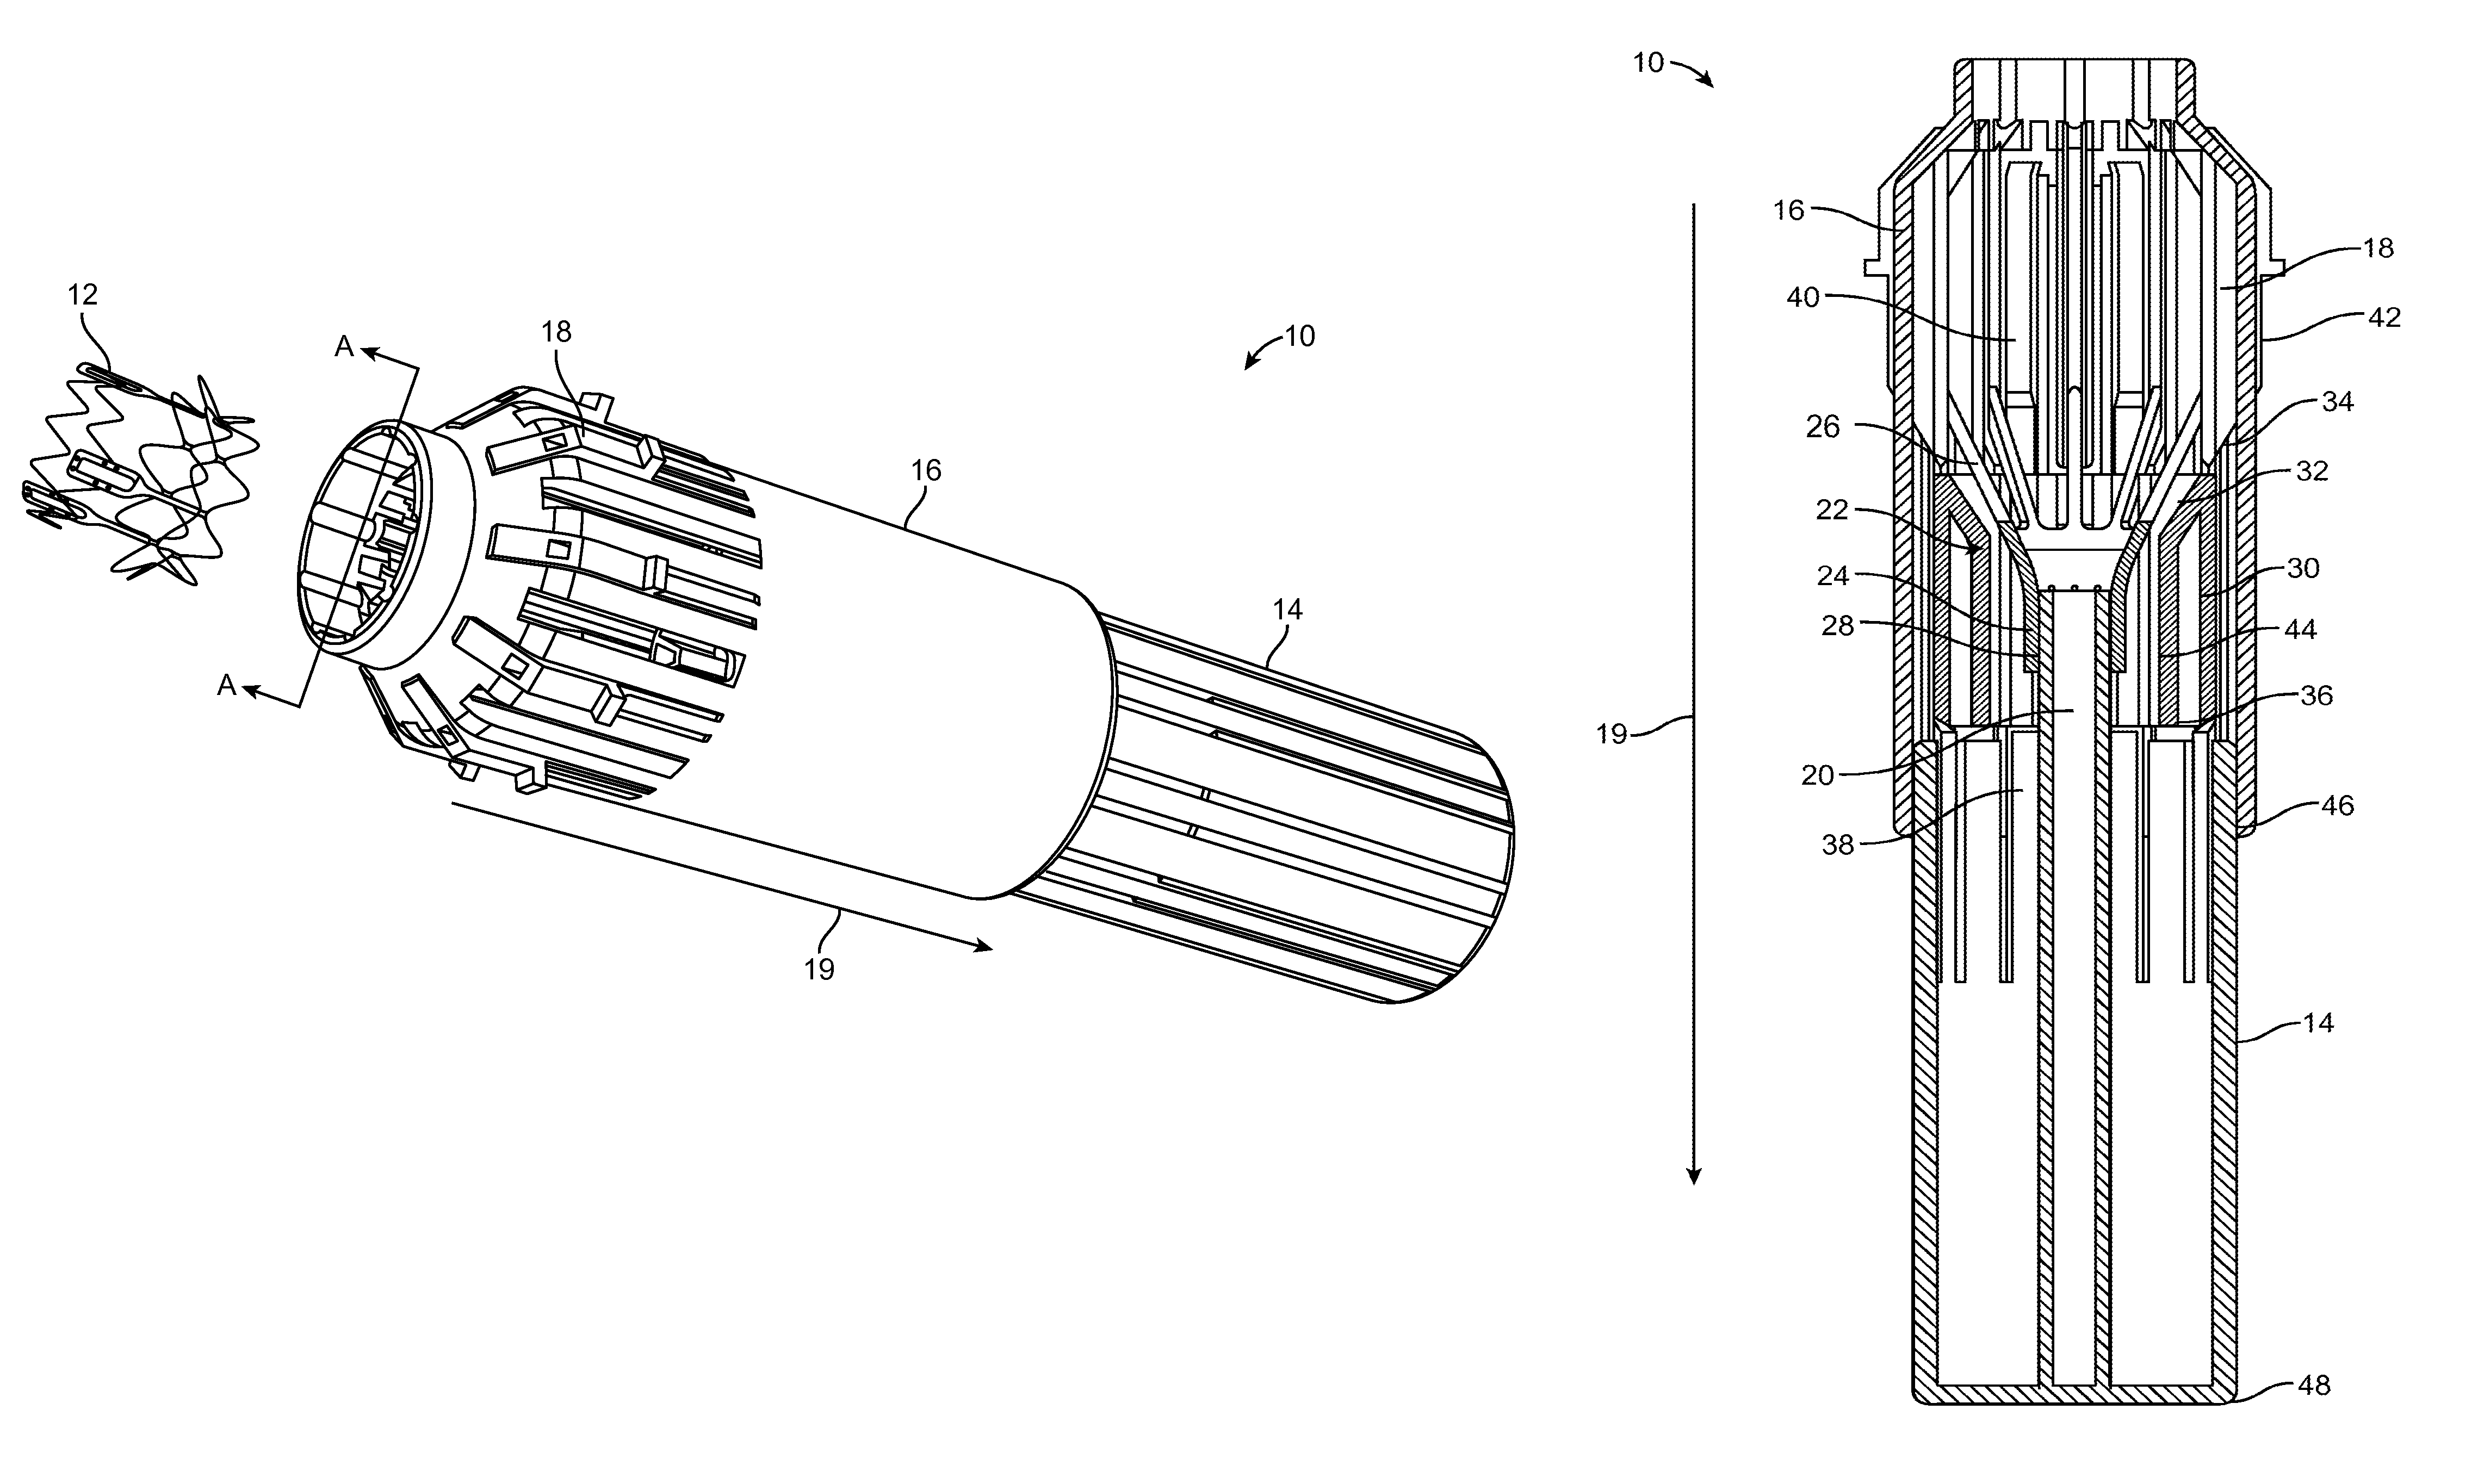 Devices and methods for crimping and loading a collapsible device into a delivery system